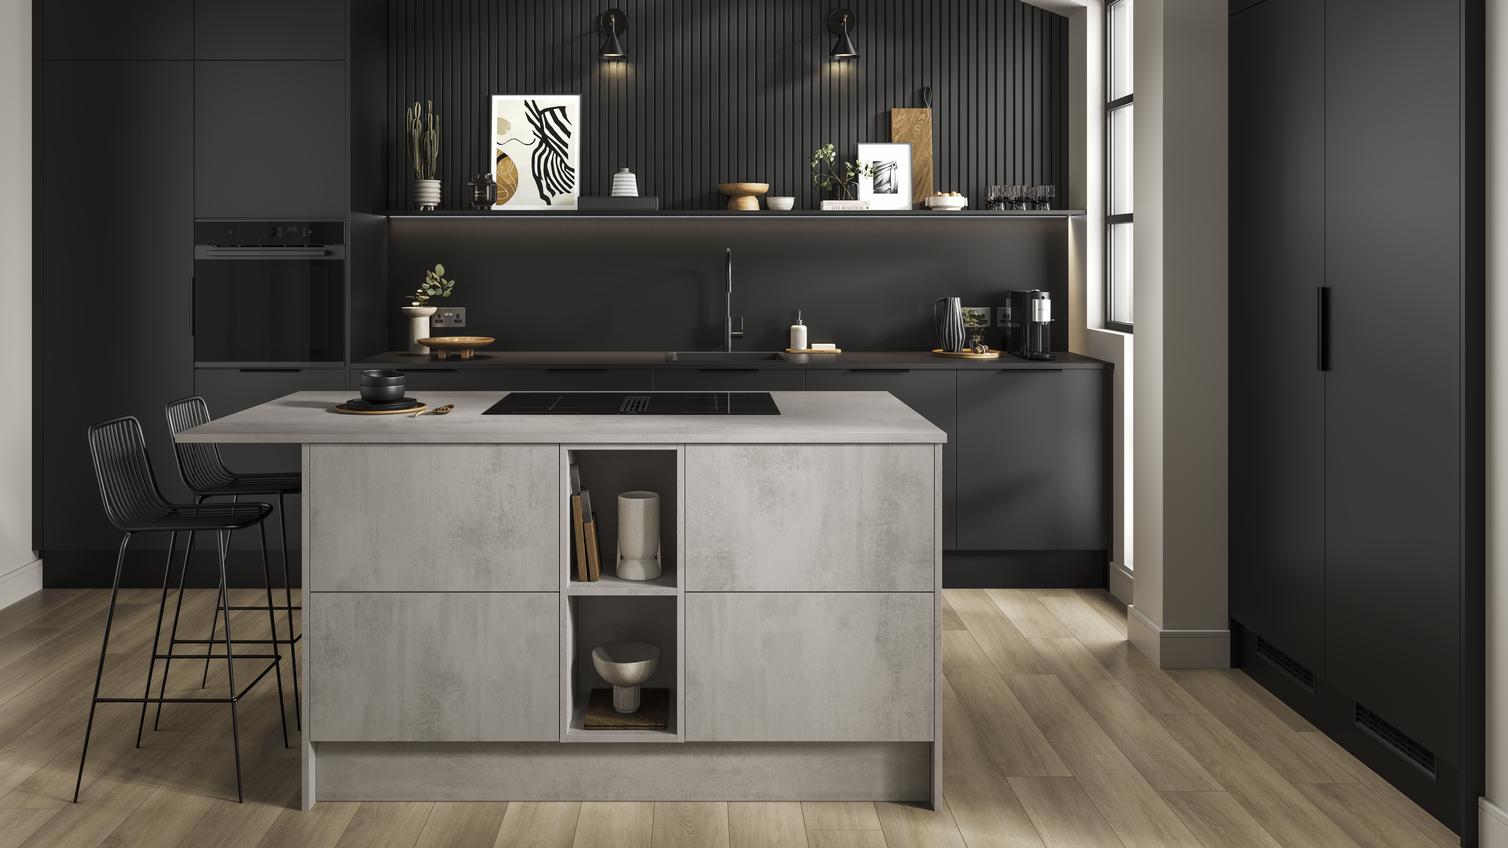 A matt black kitchen with a black worktop and appliances. Includes a grey, stone-effect kitchen island.